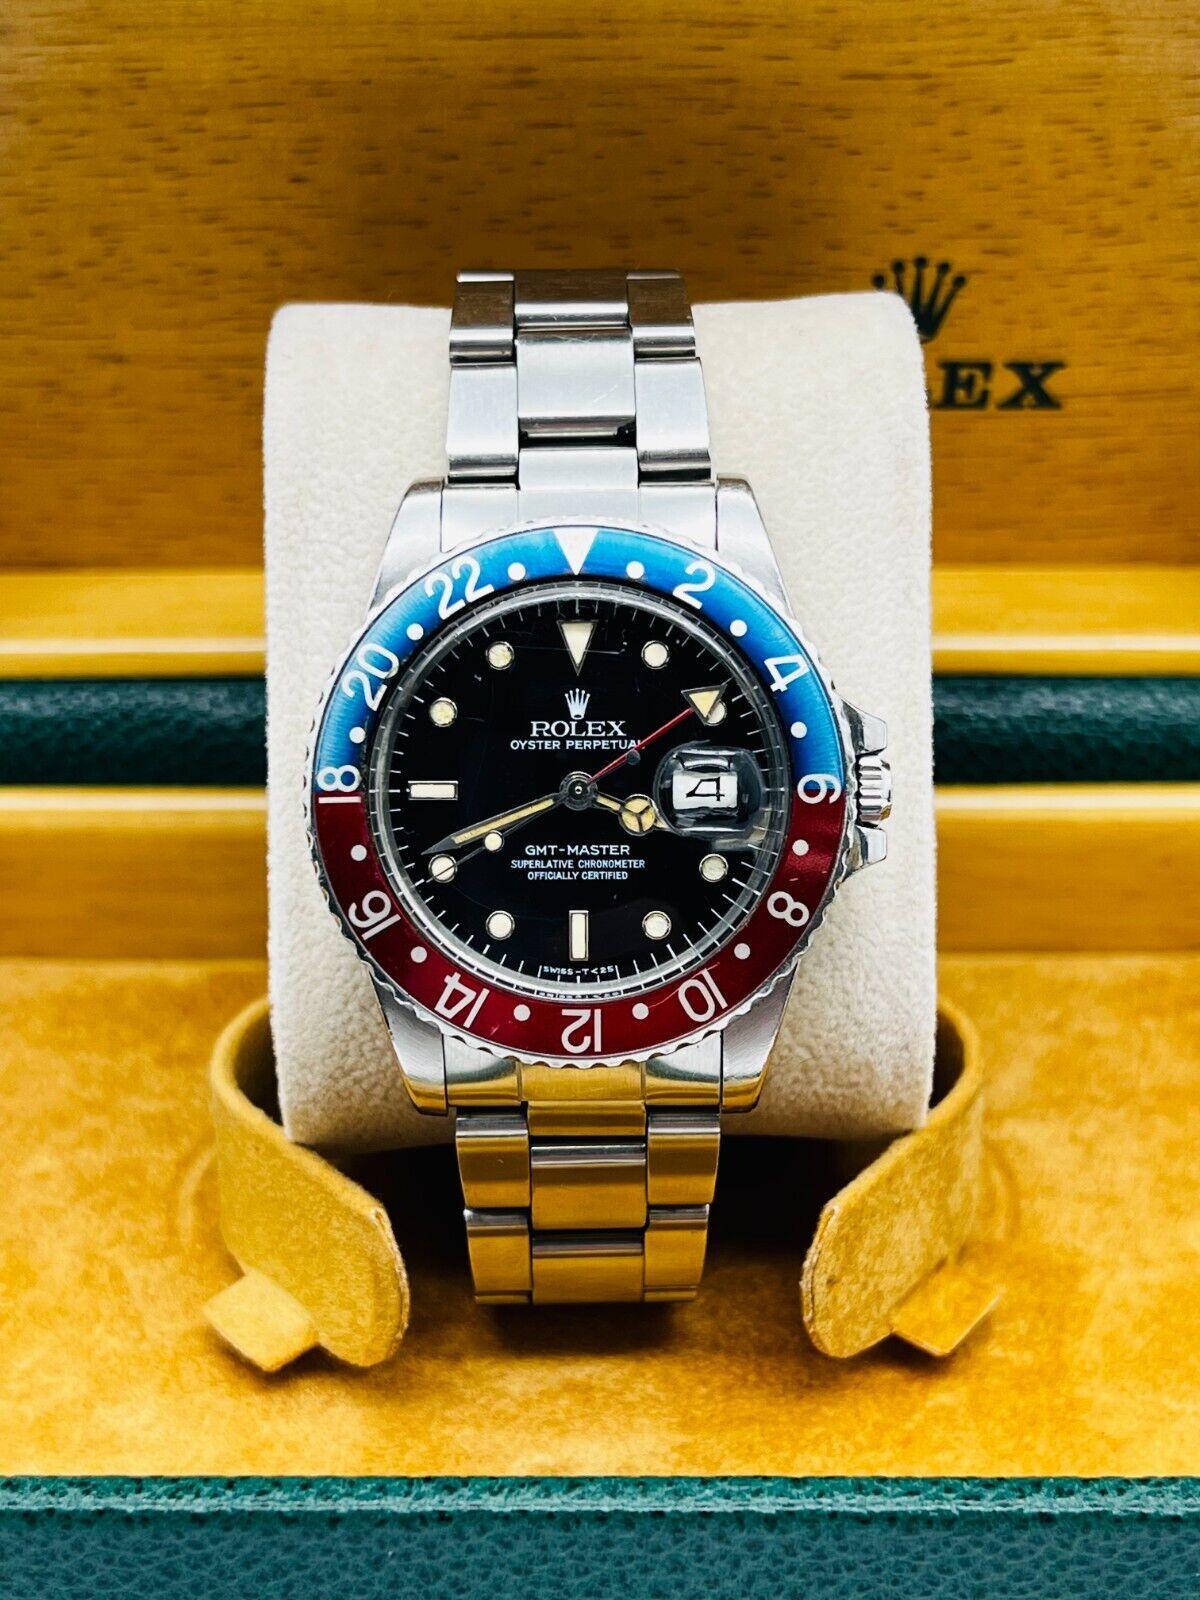 Rare Rolex 16750 GMT Master Pepsi Stainless Steel Original Spider Glossy Dial For Sale 8